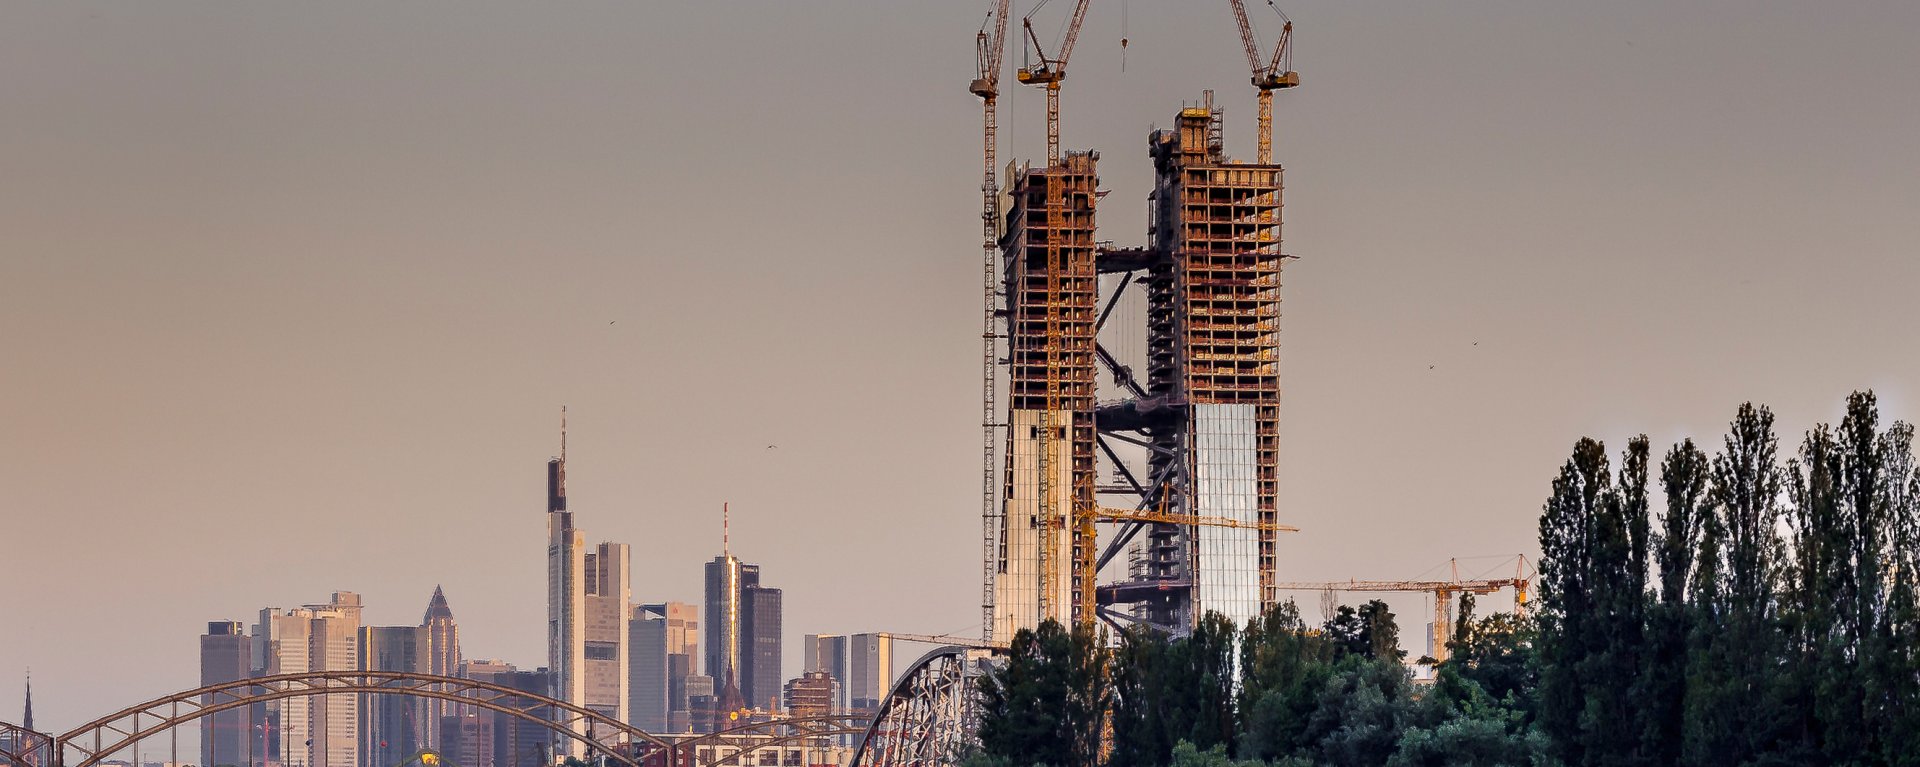 European Central Bank – ECB construction site in the summer of 2012